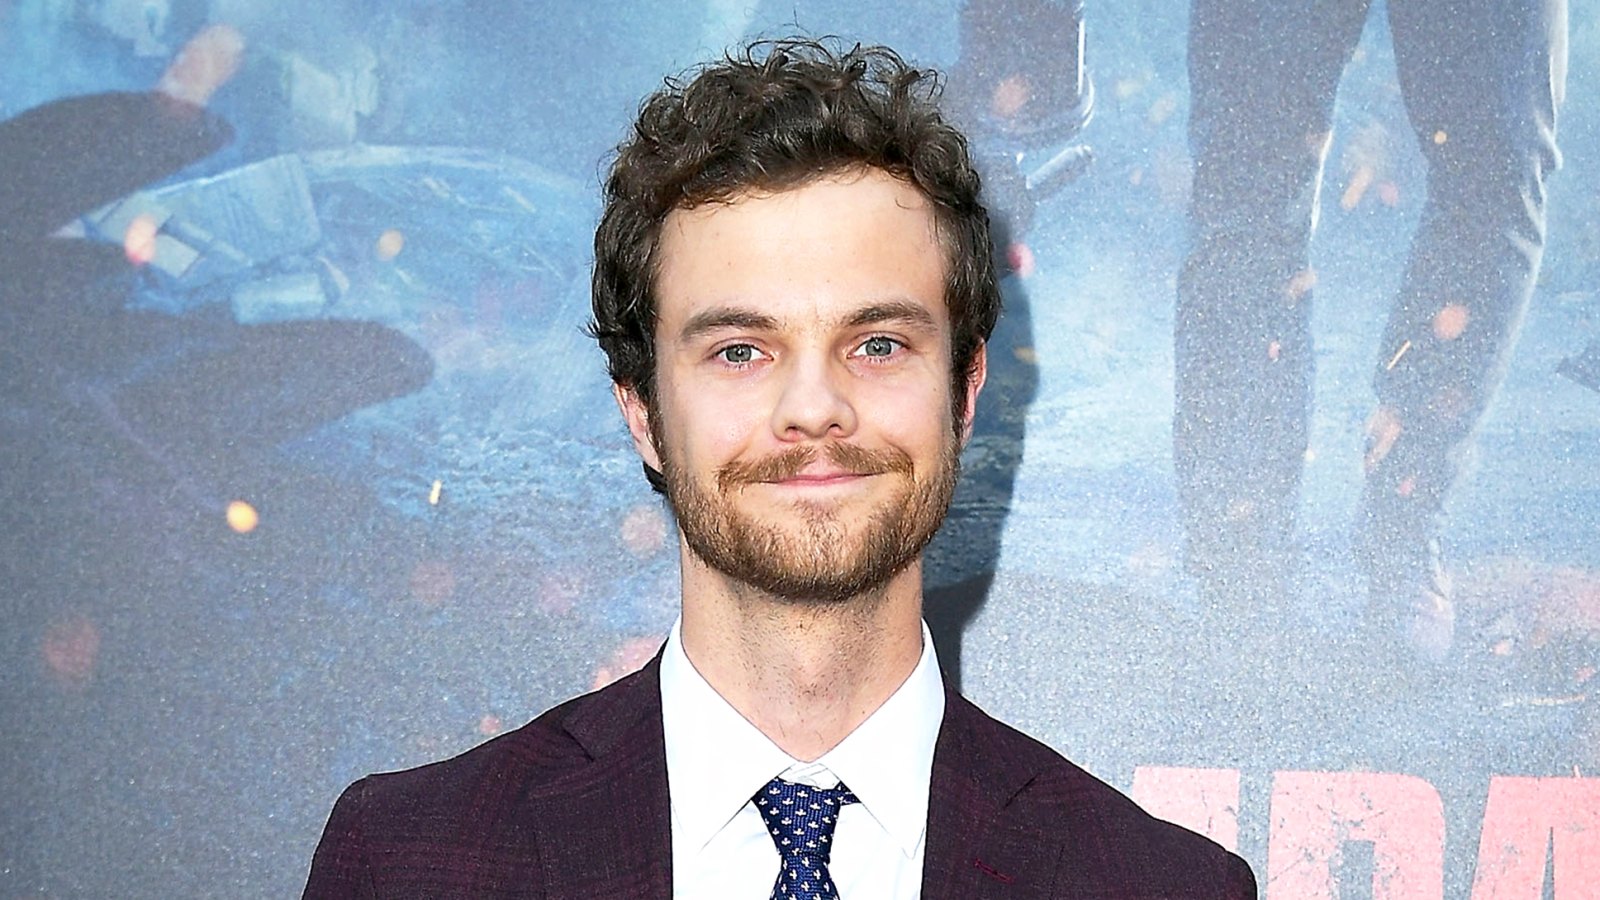 Jack Quaid arrives at the premiere of Warner Bros. Pictures' "Rampage" at Microsoft Theater on April 4, 2018 in Los Angeles, California.